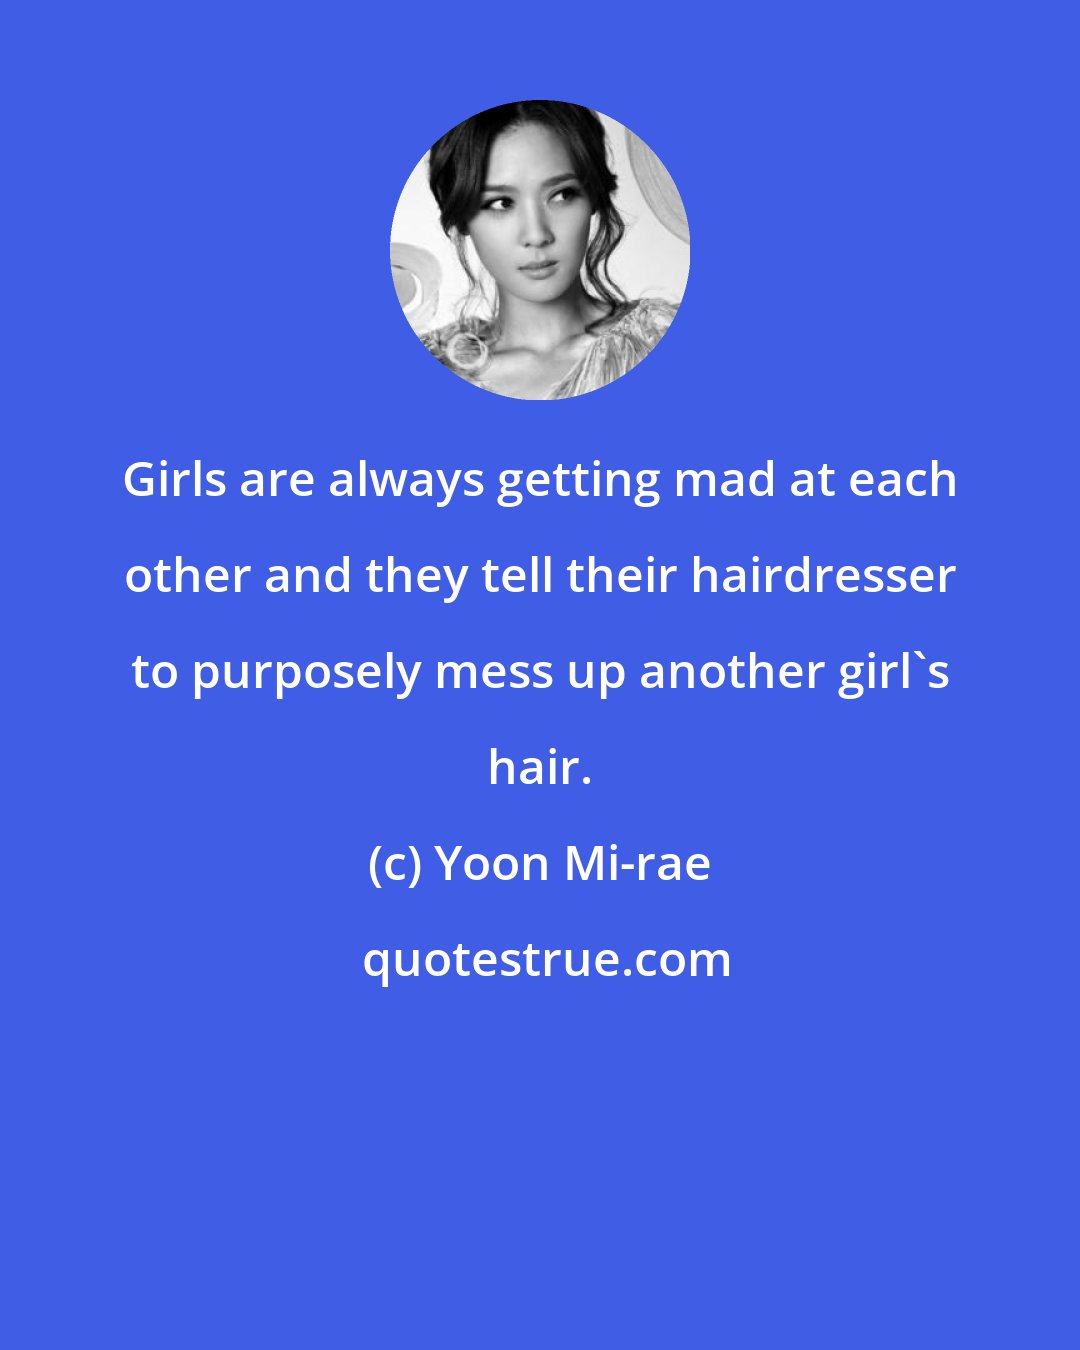 Yoon Mi-rae: Girls are always getting mad at each other and they tell their hairdresser to purposely mess up another girl's hair.